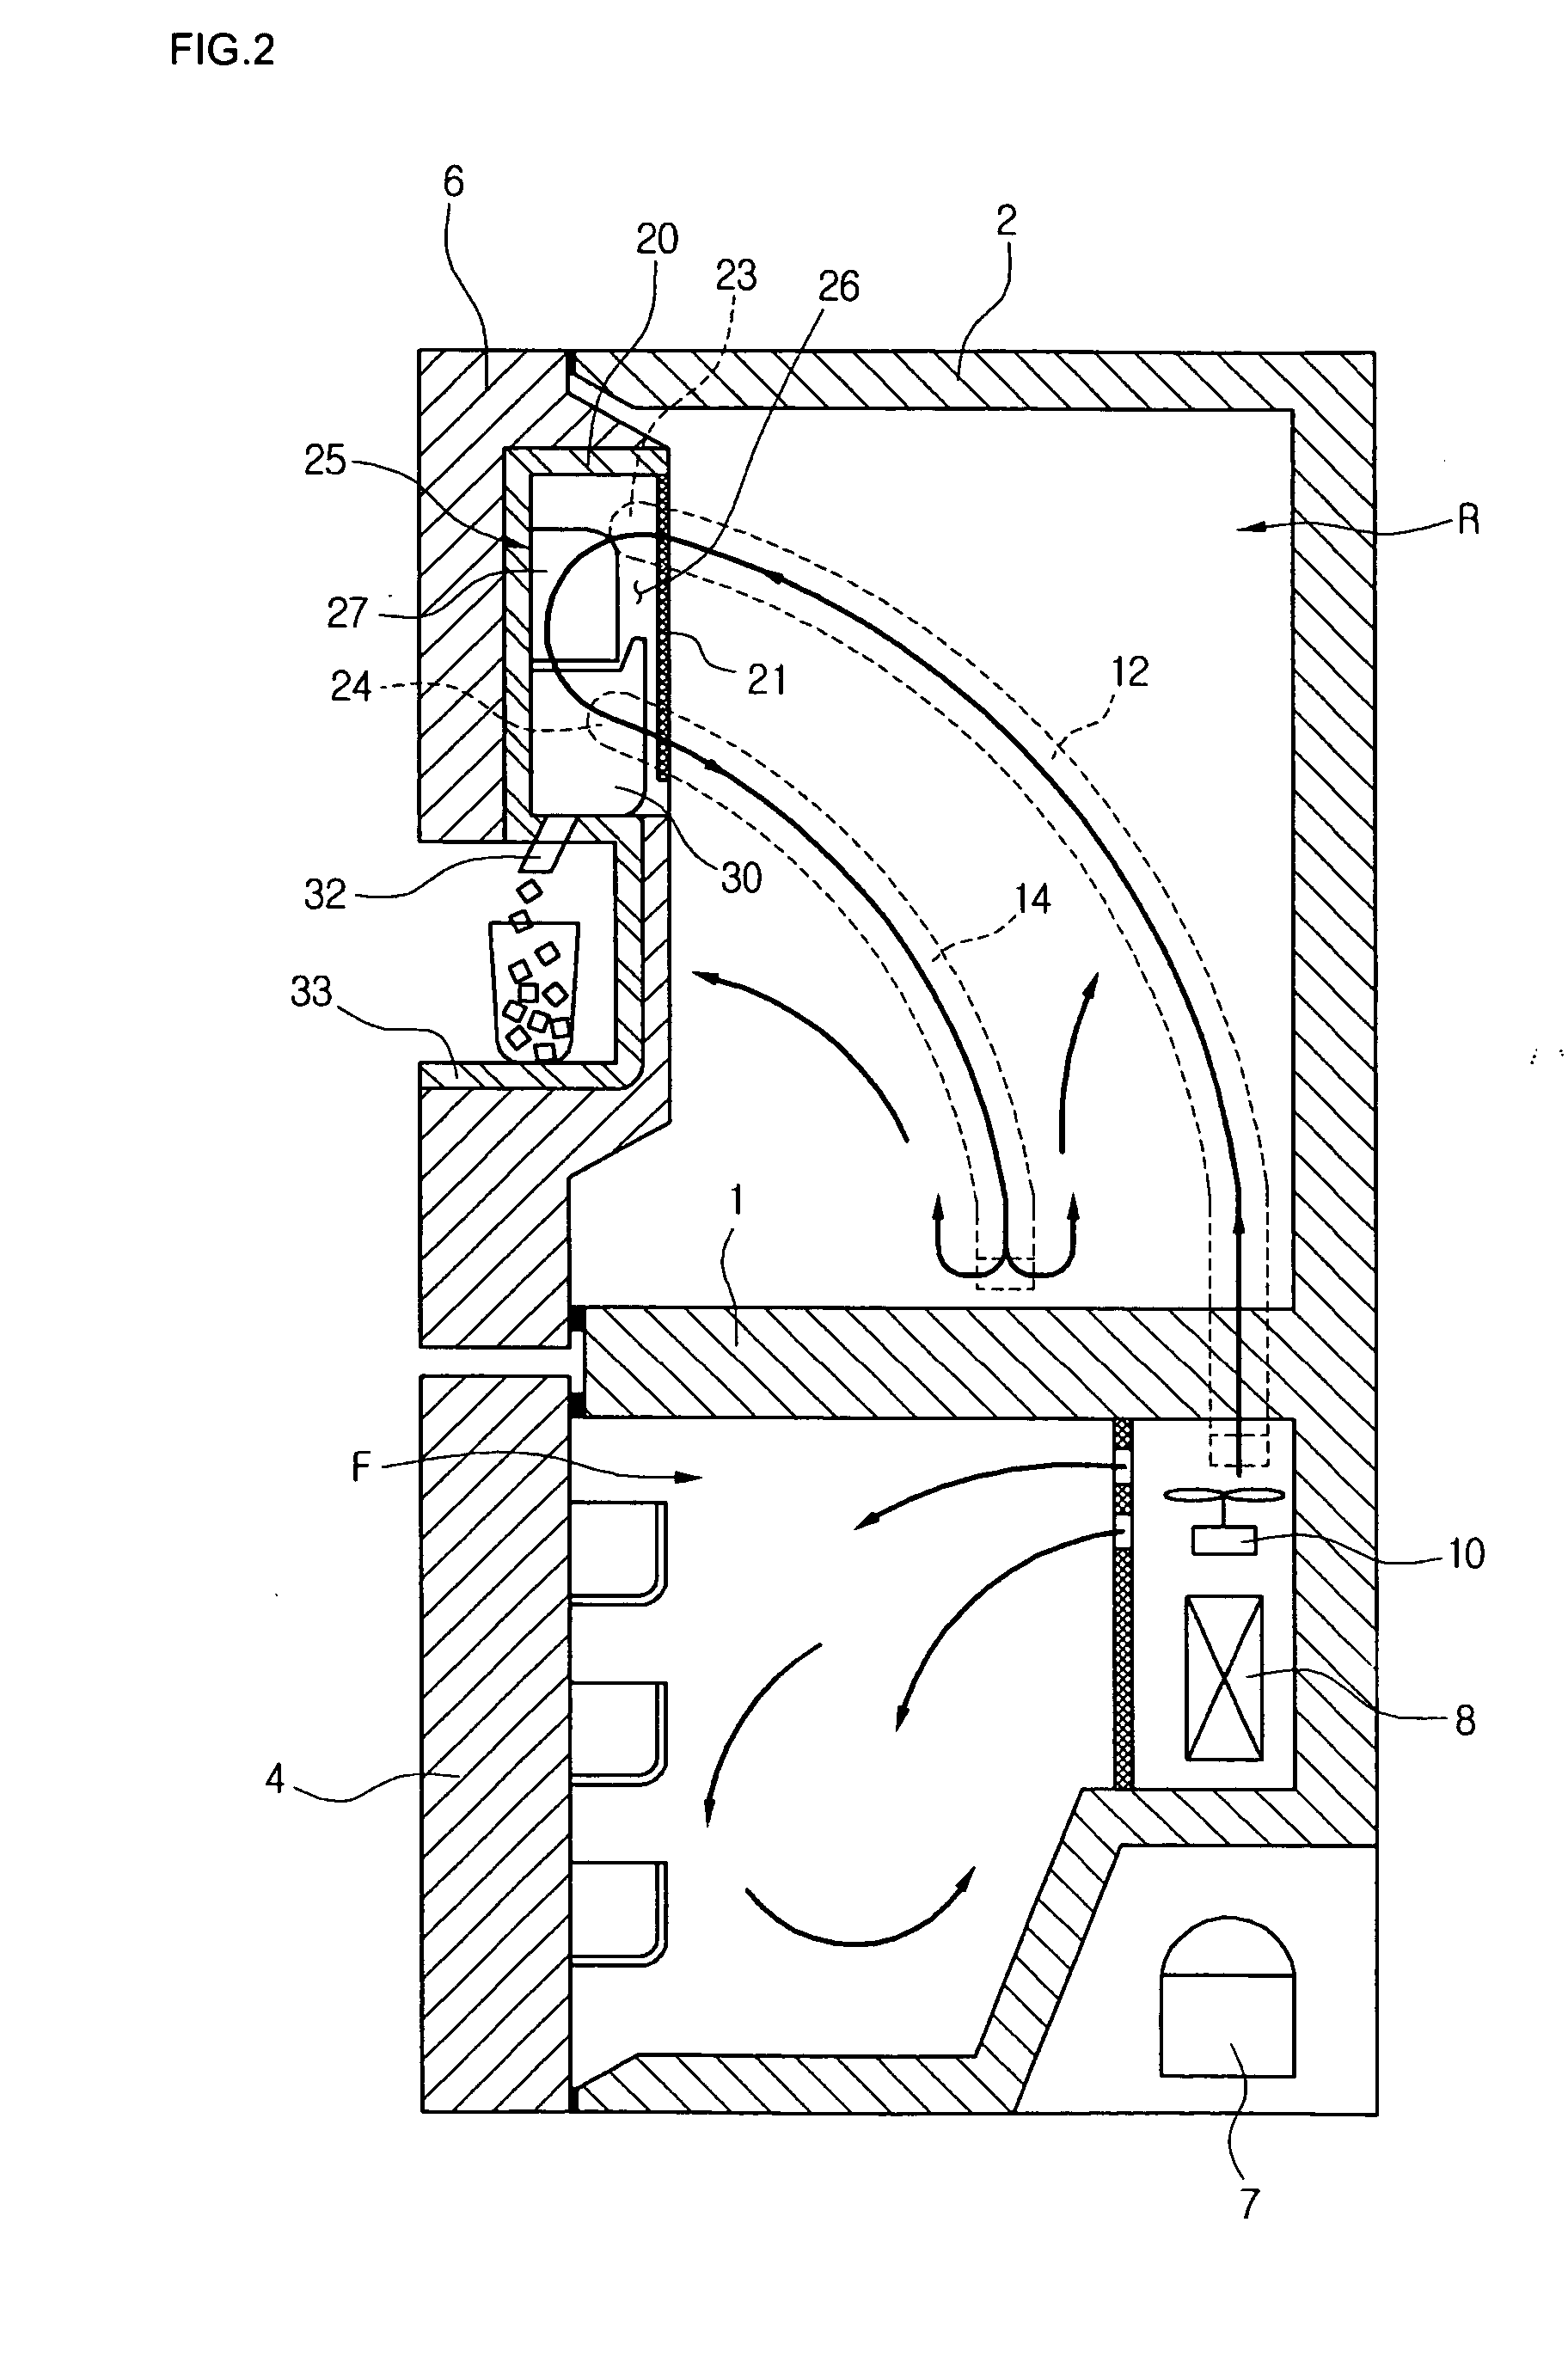 Refrigerator and airflow passage for ice making compartment of the same